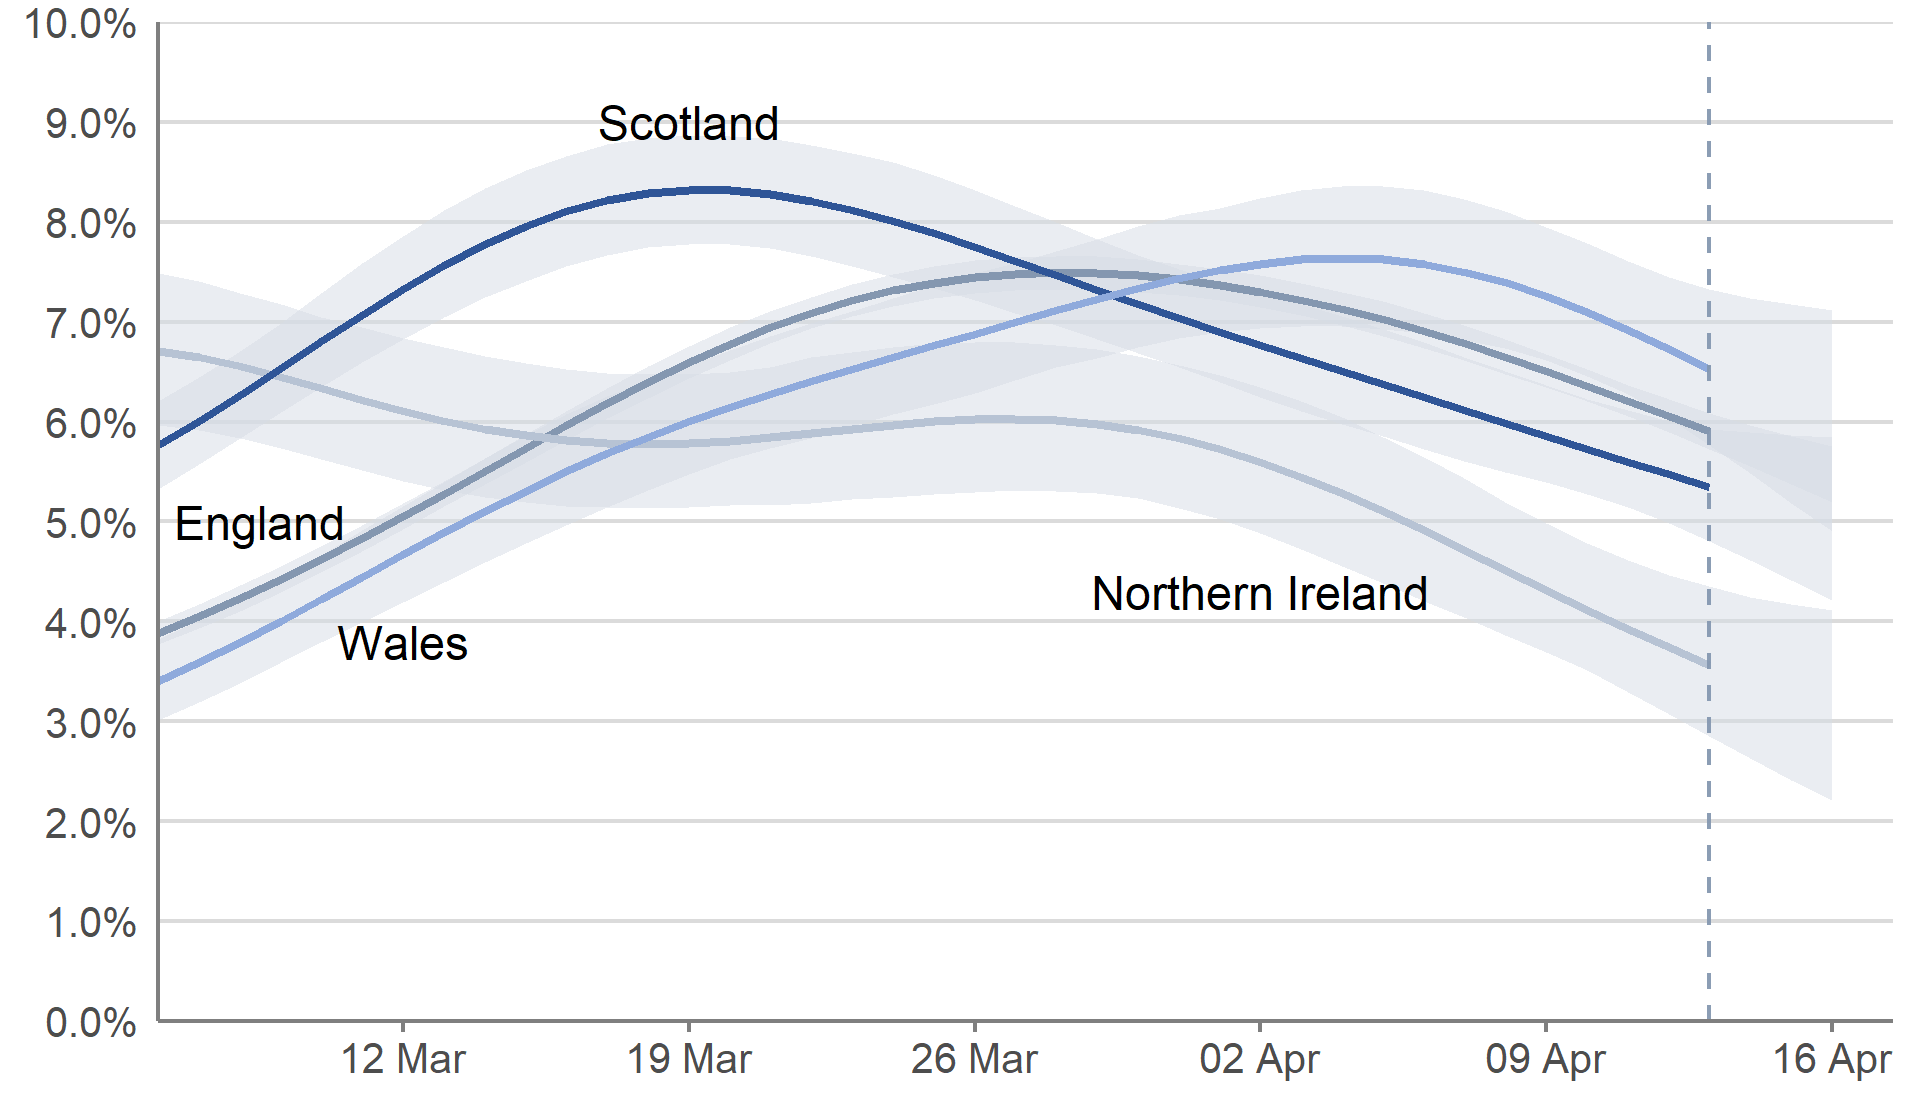 In the most recent week (10 to 16 April 2022), the percentage of people testing positive for COVID-19 continued to decrease in England, Northern Ireland and Scotland and decreased in Wales.